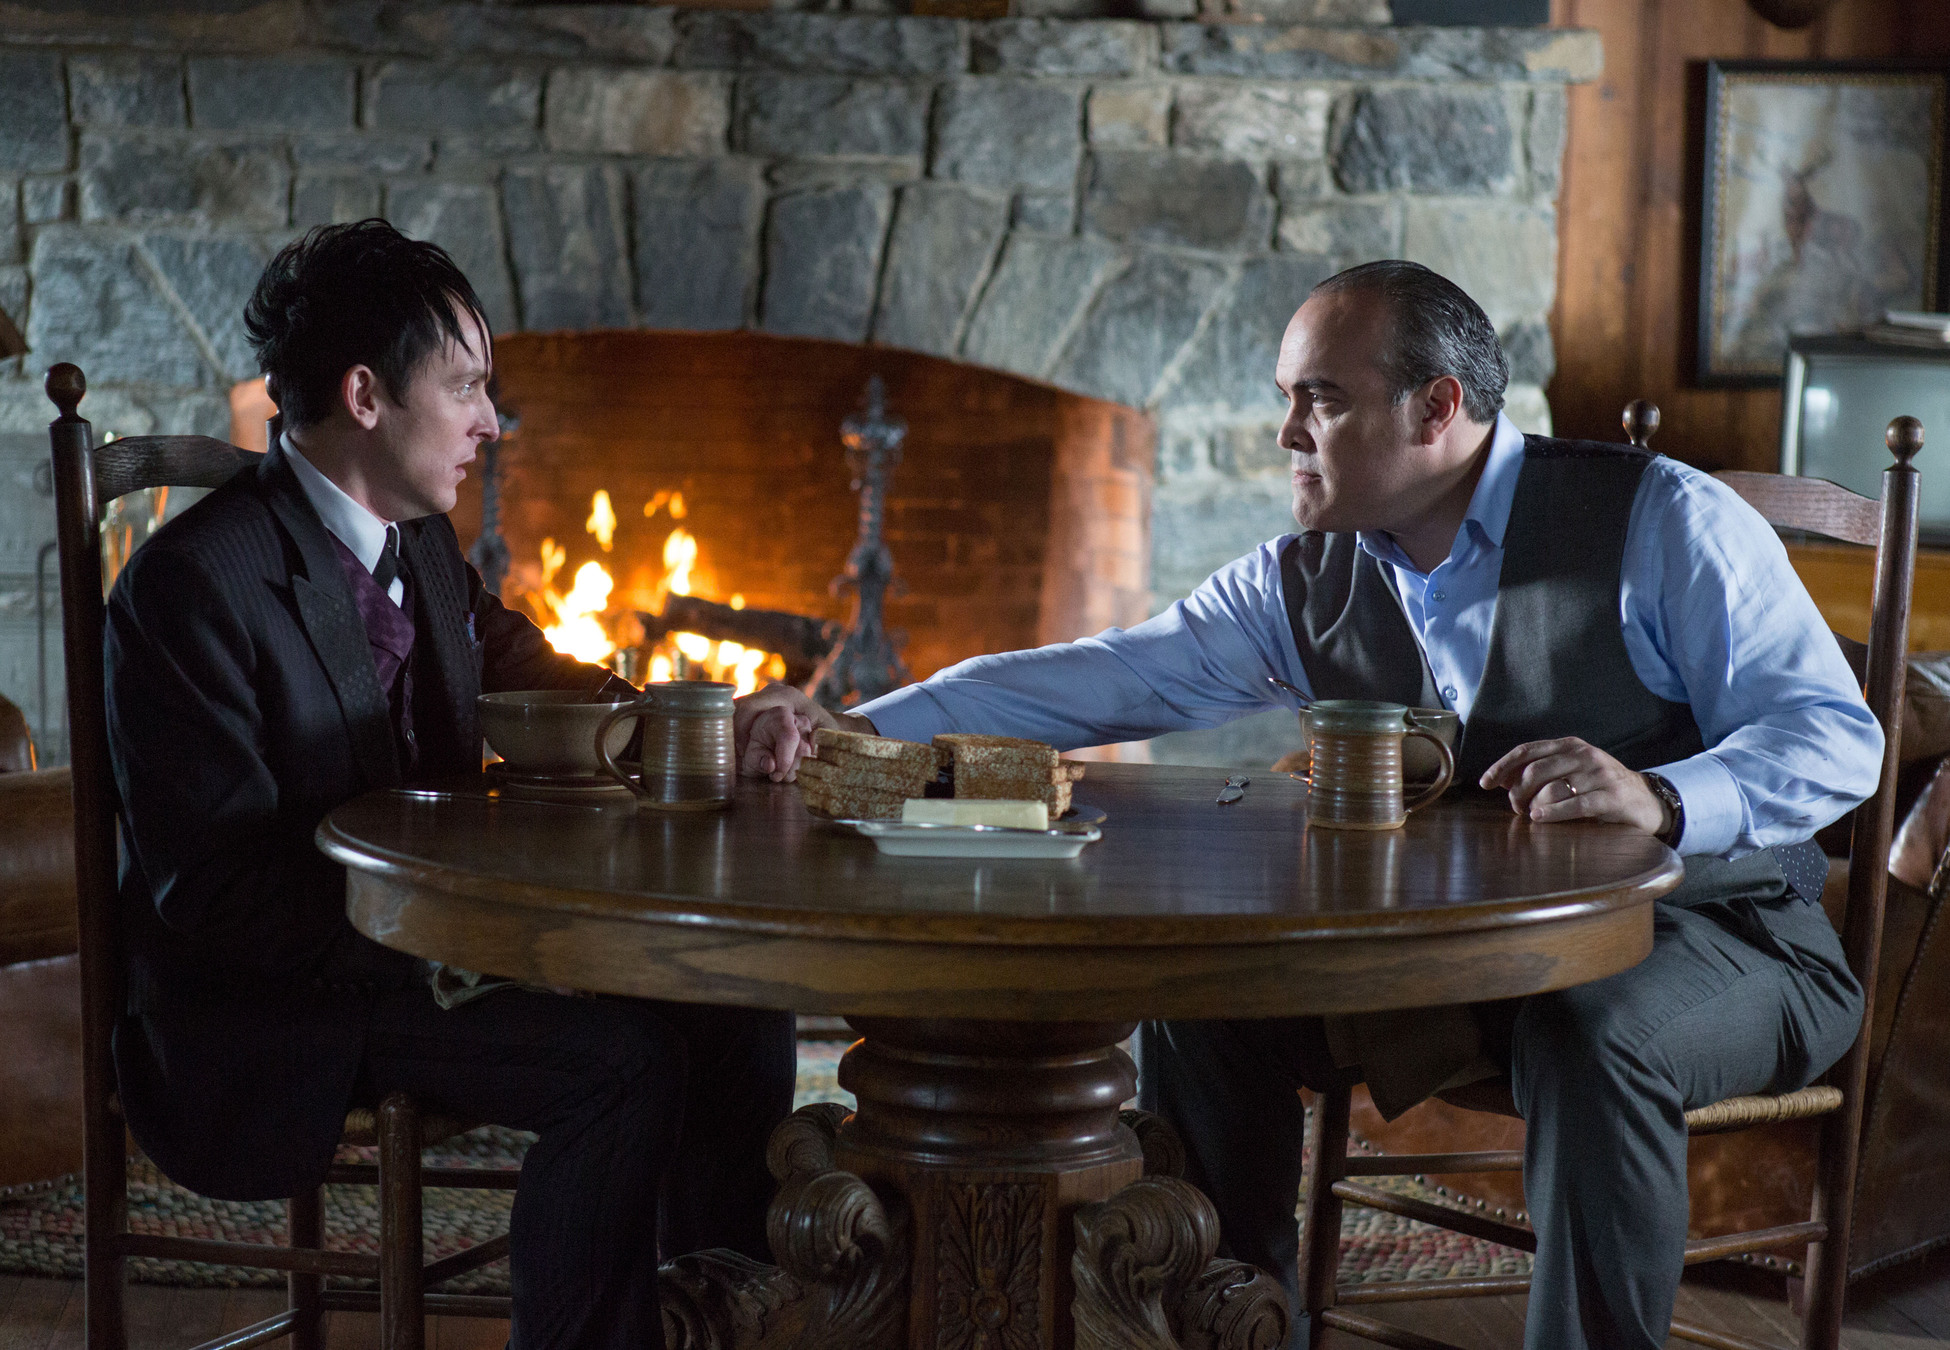 GOTHAM: Maroni (guest star David Zayas, R) tests Oswald Cobblepot's (Robin Lord Taylor, L) loyalty in the "The Fearsome Dr. Crane" episode of GOTHAM airing Monday, Feb. 2 (8:00-9:00 PM ET/PT) on FOX. Â©2015 Fox Broadcasting Co. Cr: Jessica Miglio/FOX